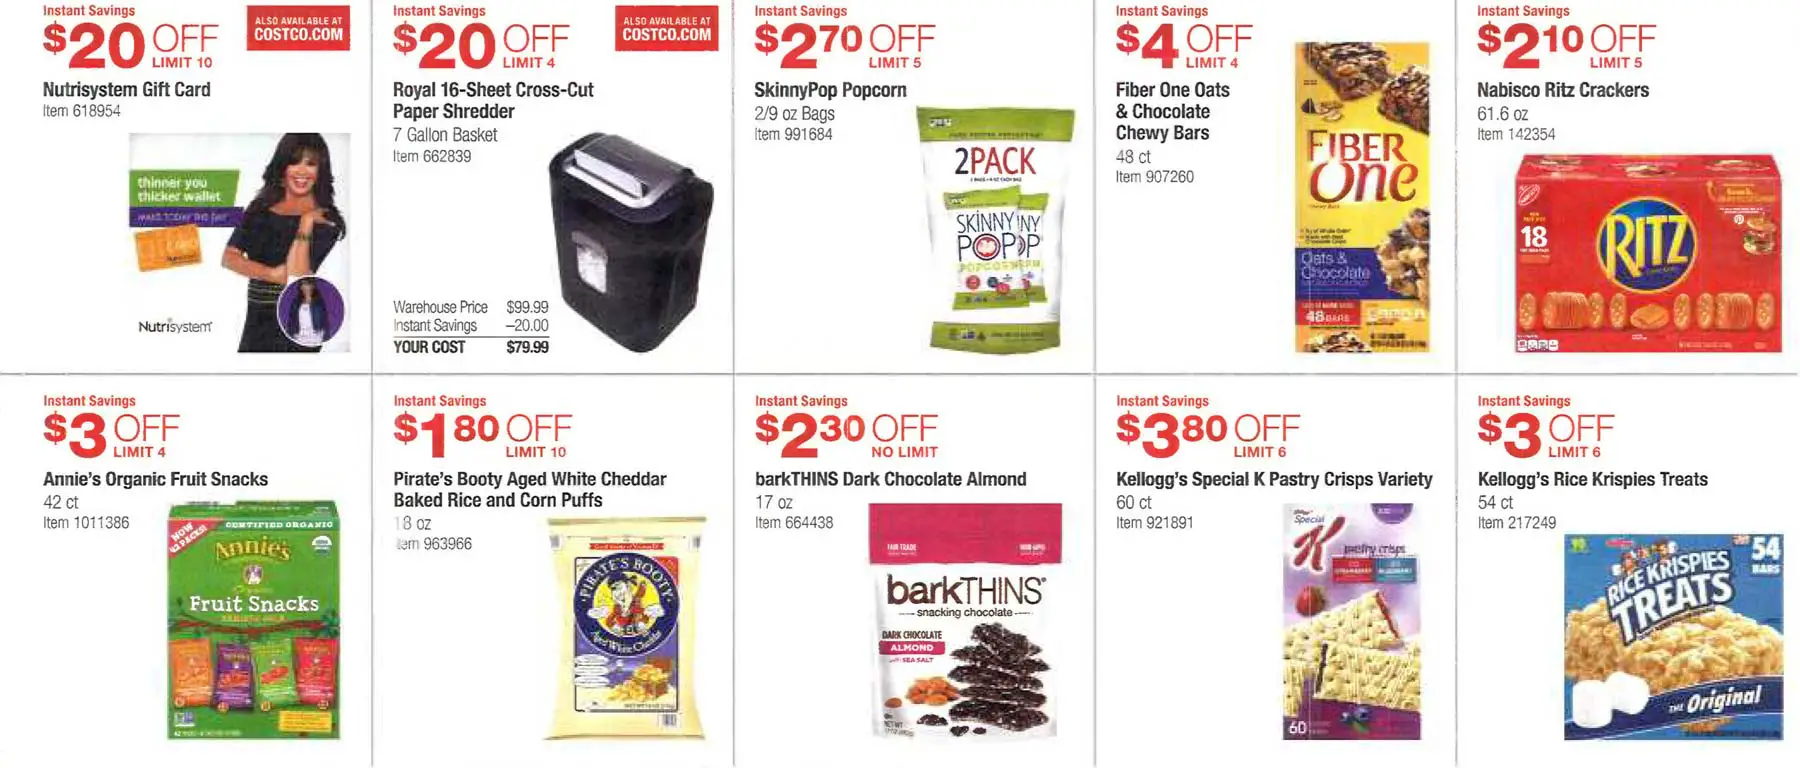 March 2016 Costco Coupon Book Page 6